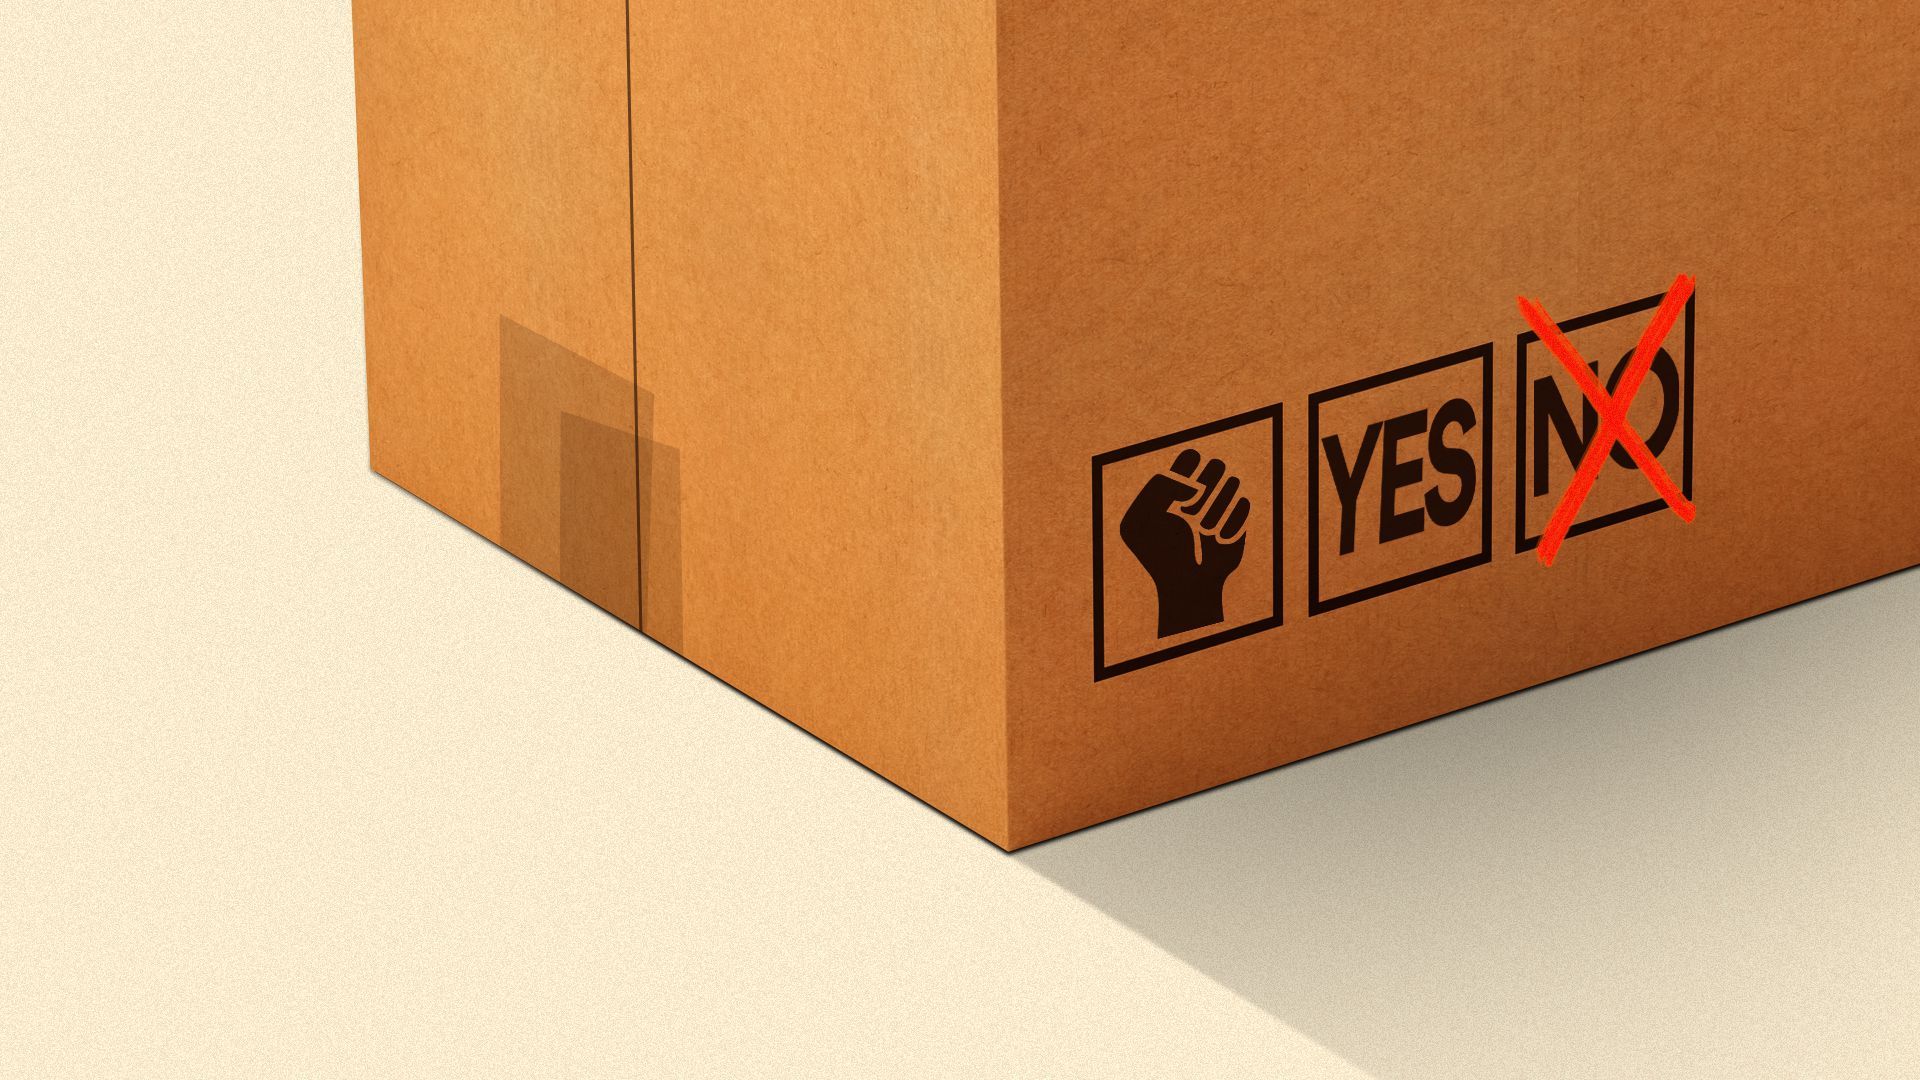 Illustration of a cardboard box with boxes containing a fist symbol and a yes and no, with an "x" over the no